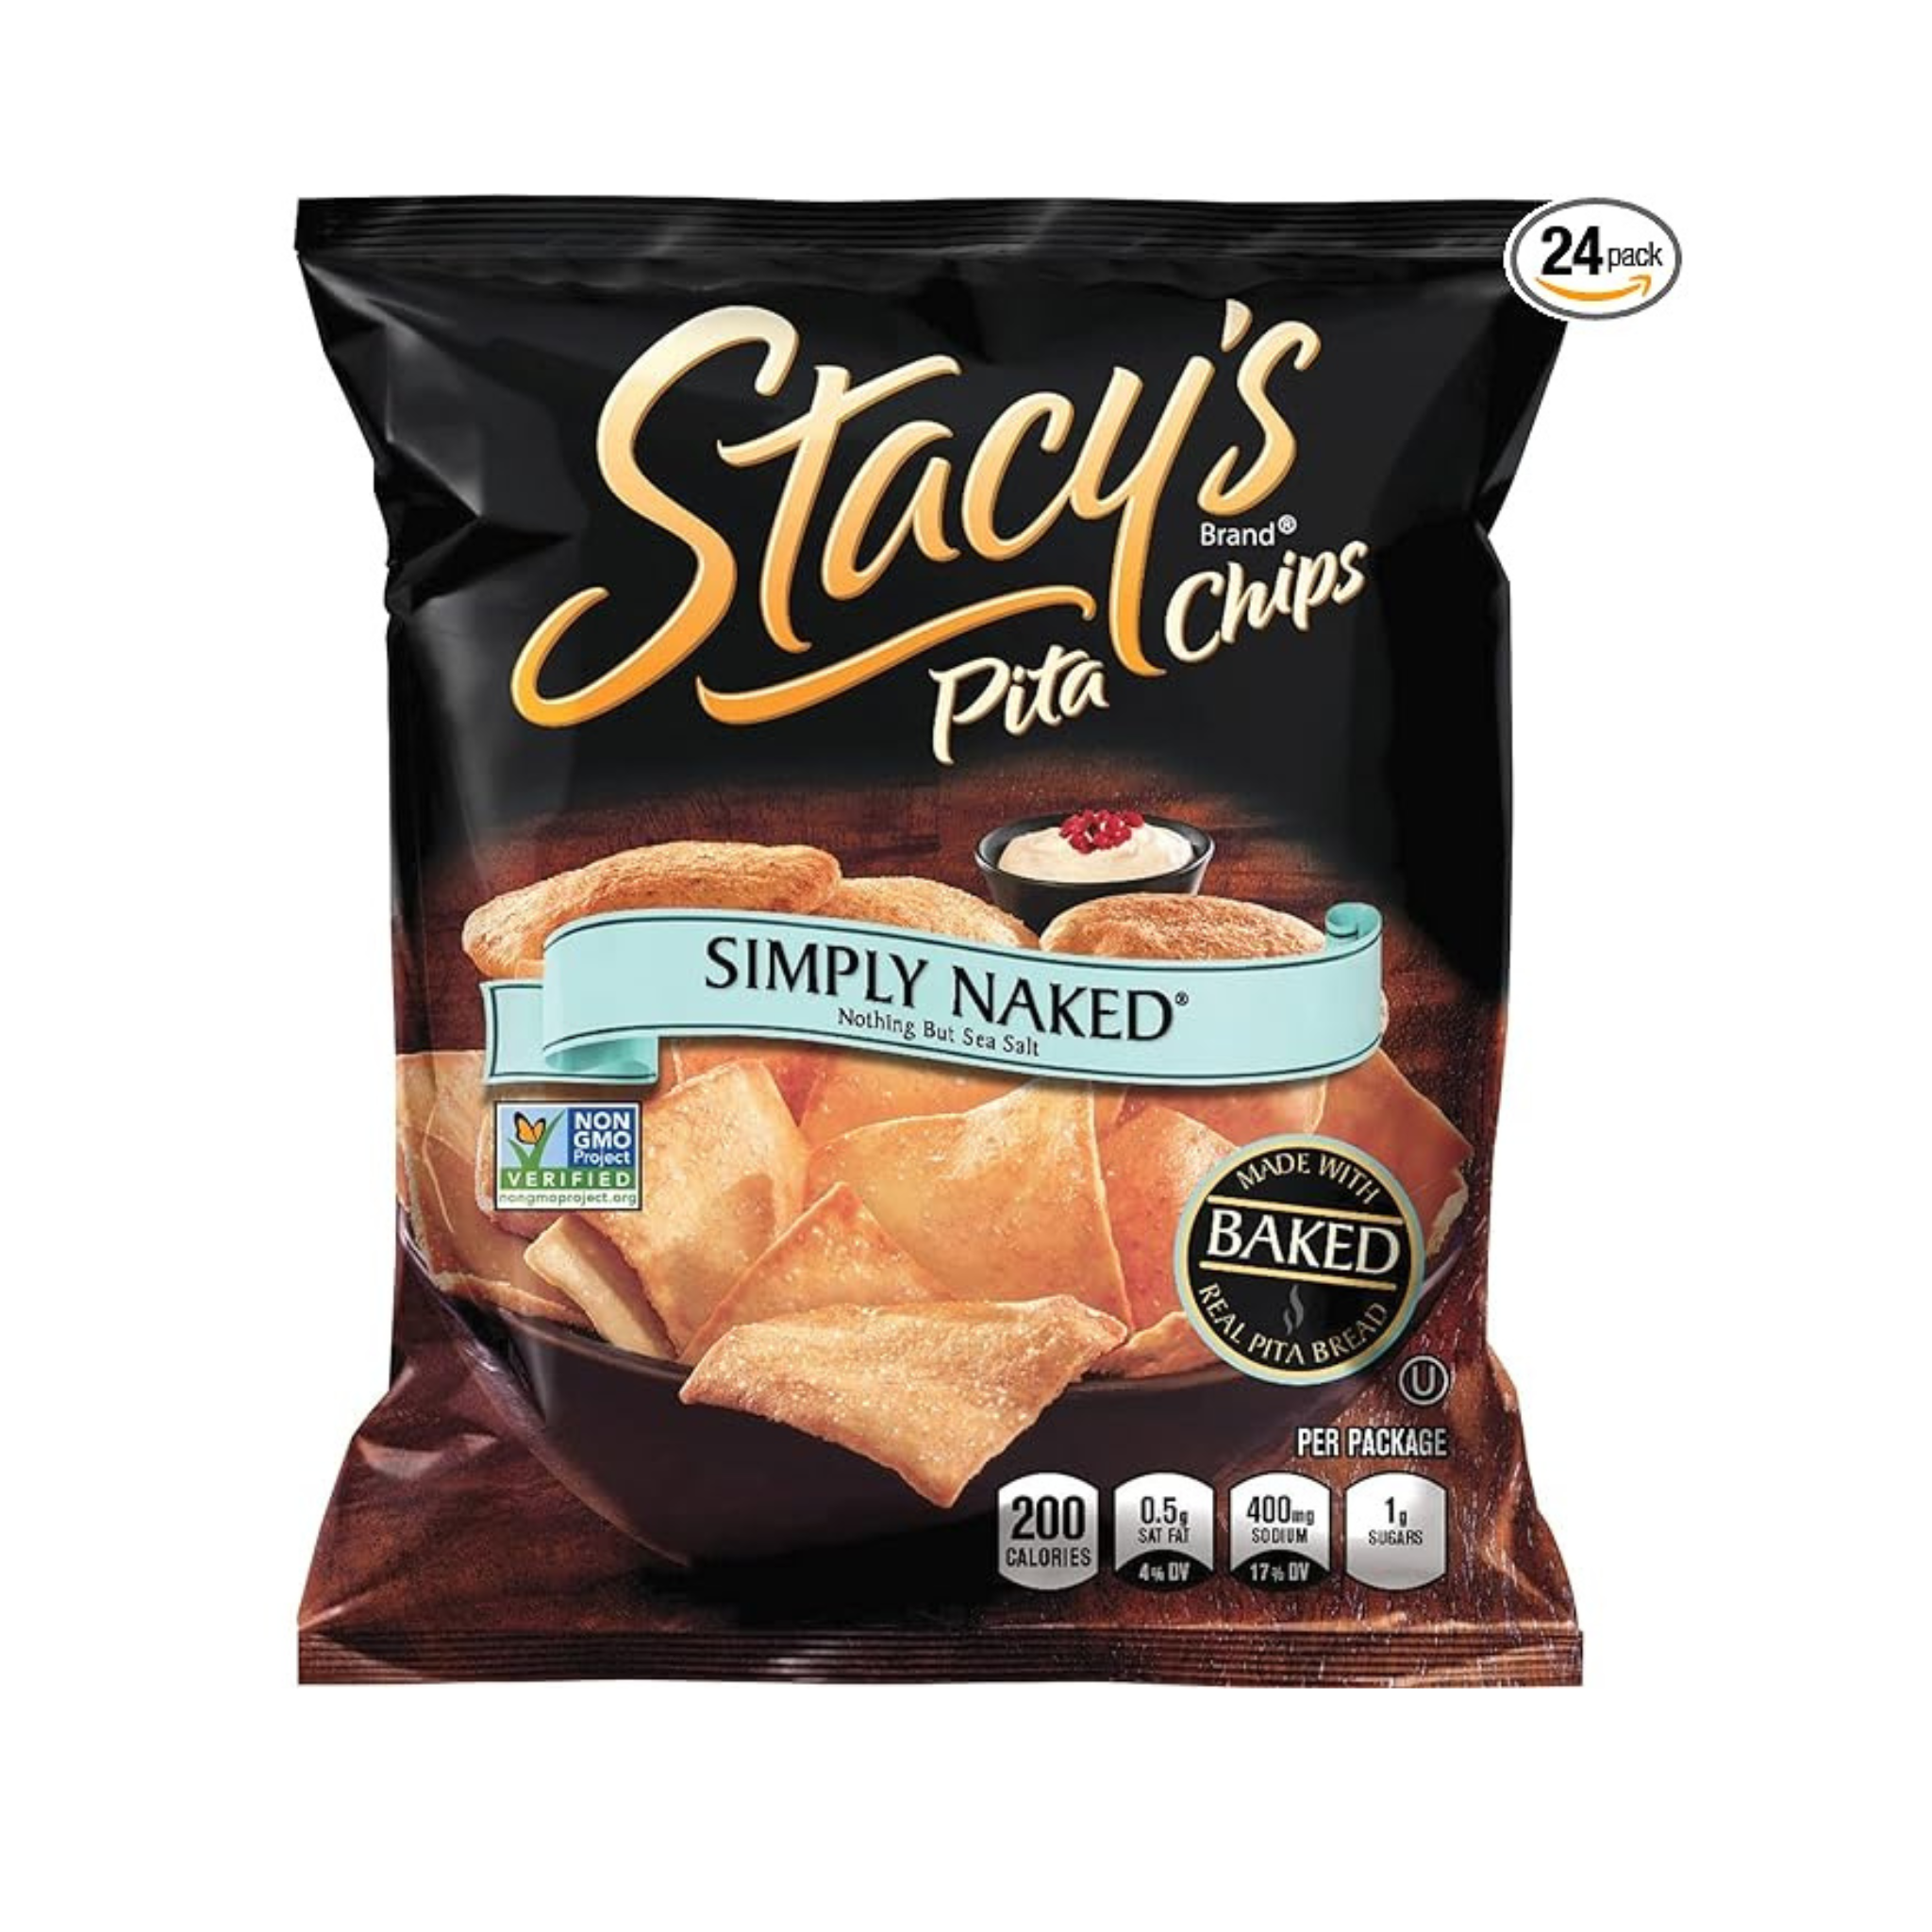 24-Pk Stacy’s Pita Chips, Simply Naked, 1.5 Ounce